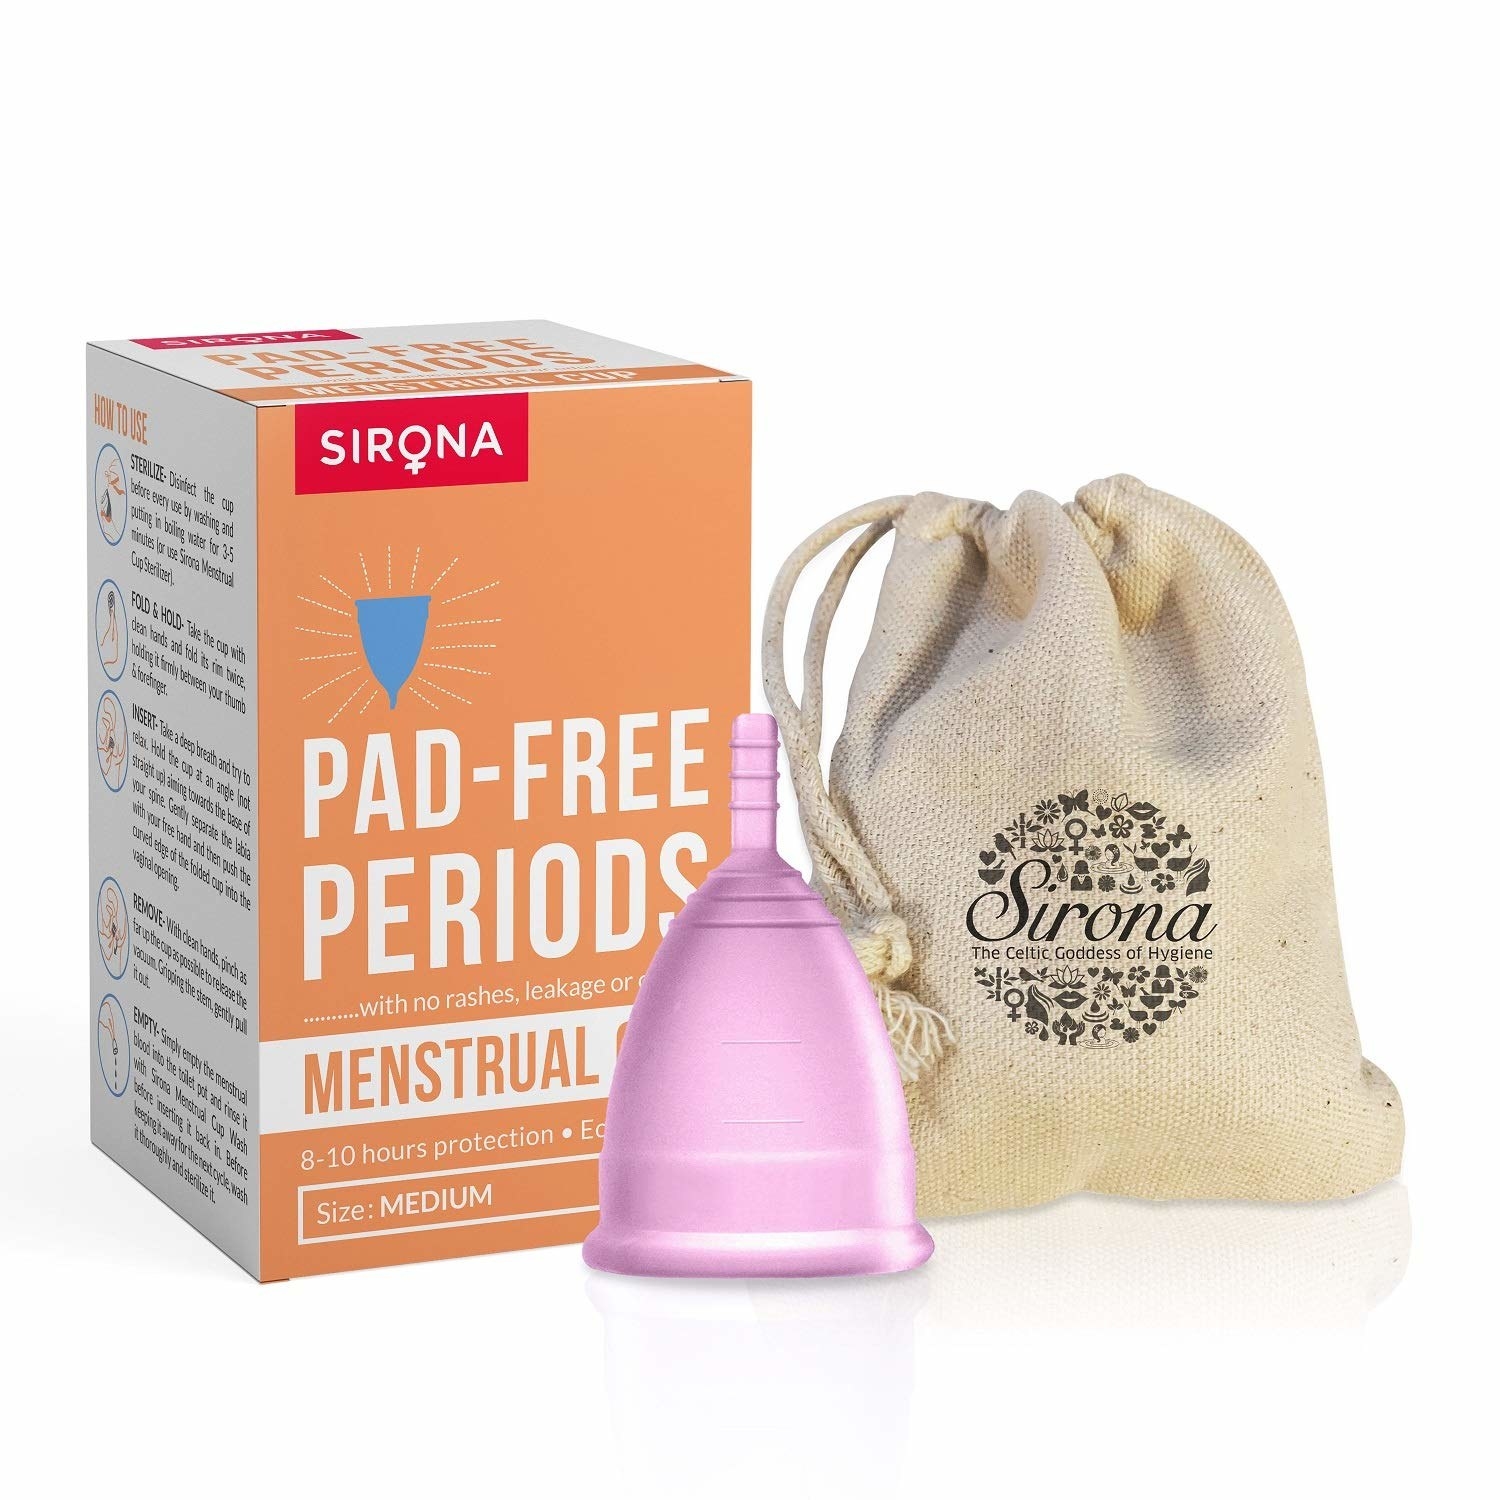 A menstrual cup with the packaging